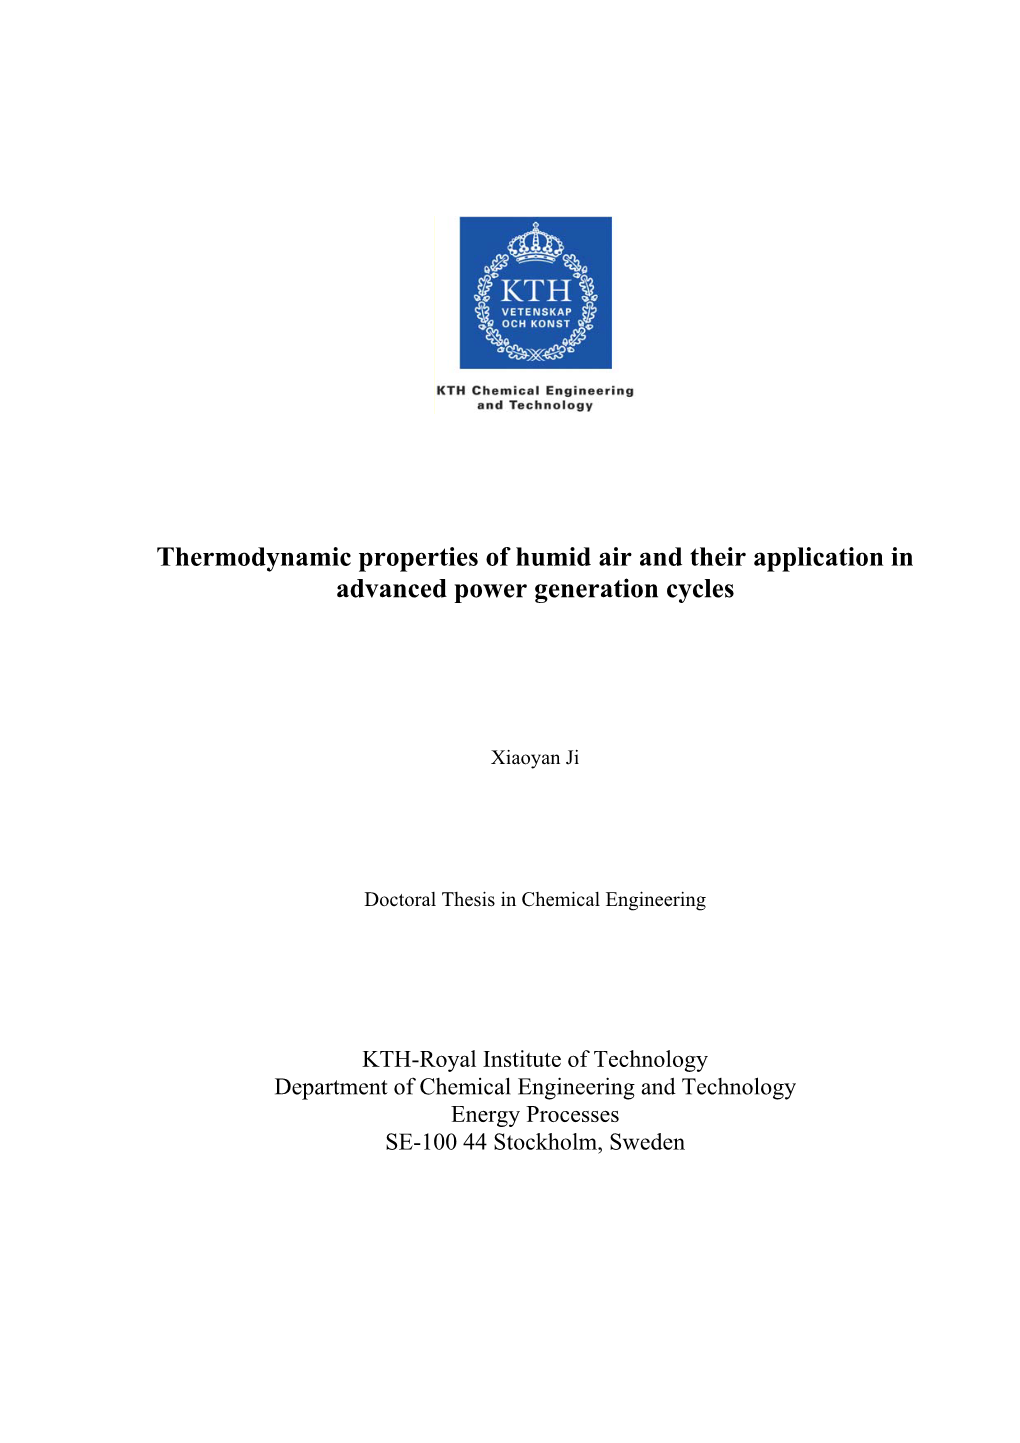 Thermodynamic Properties of Humid Air and Their Application in Advanced Power Generation Cycles